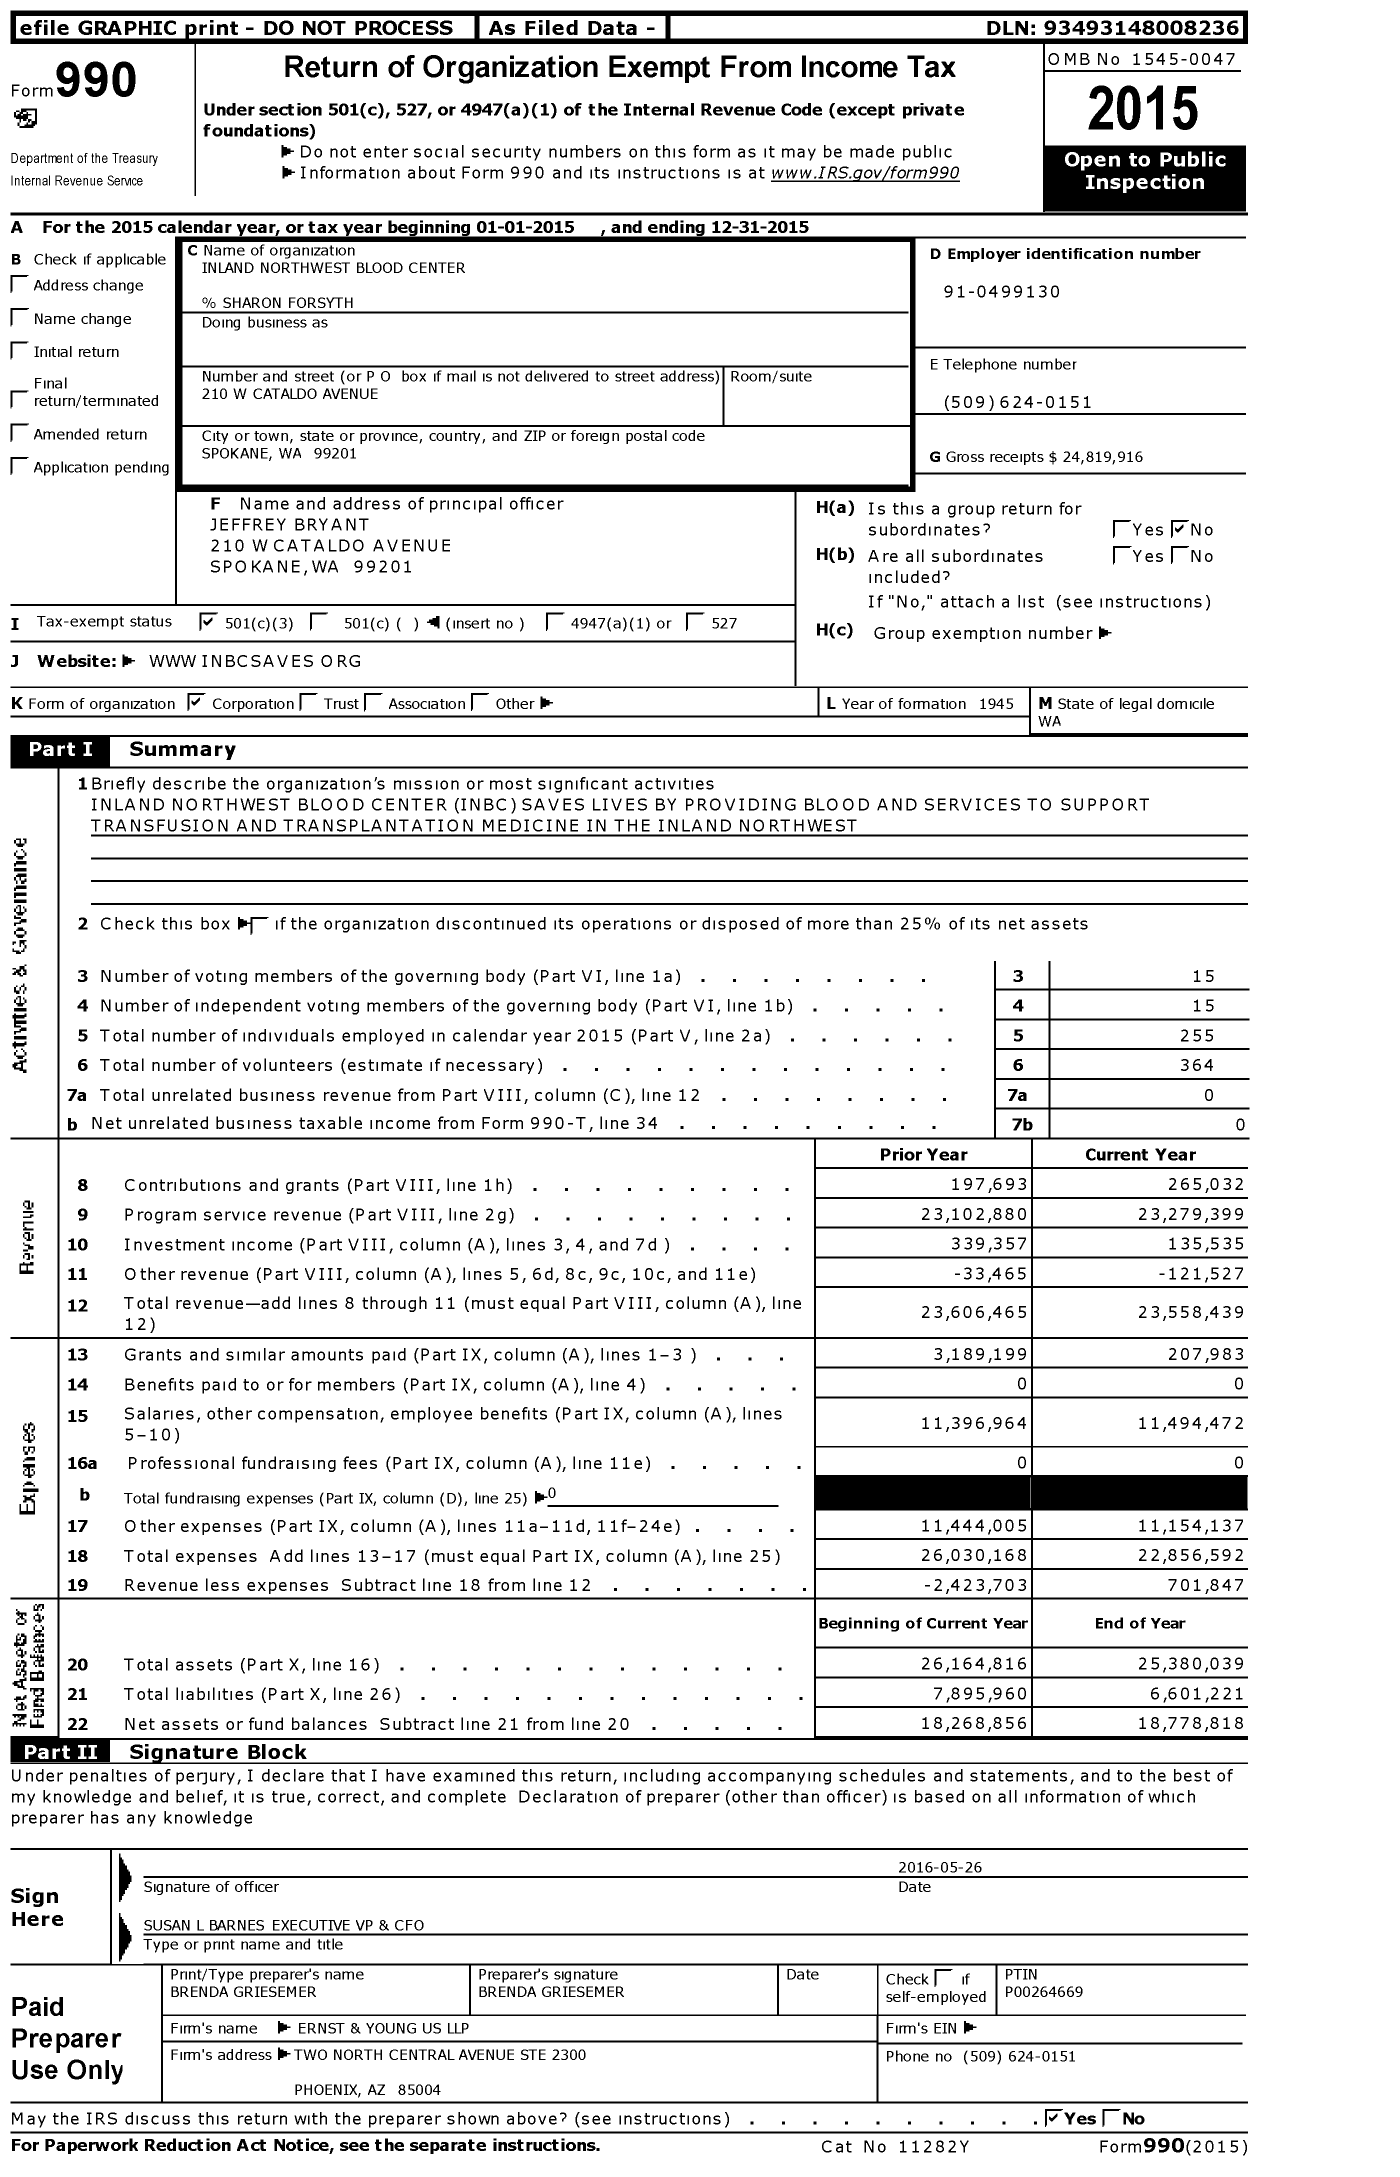 Image of first page of 2015 Form 990 for Inland Northwest Blood Center (INBC)